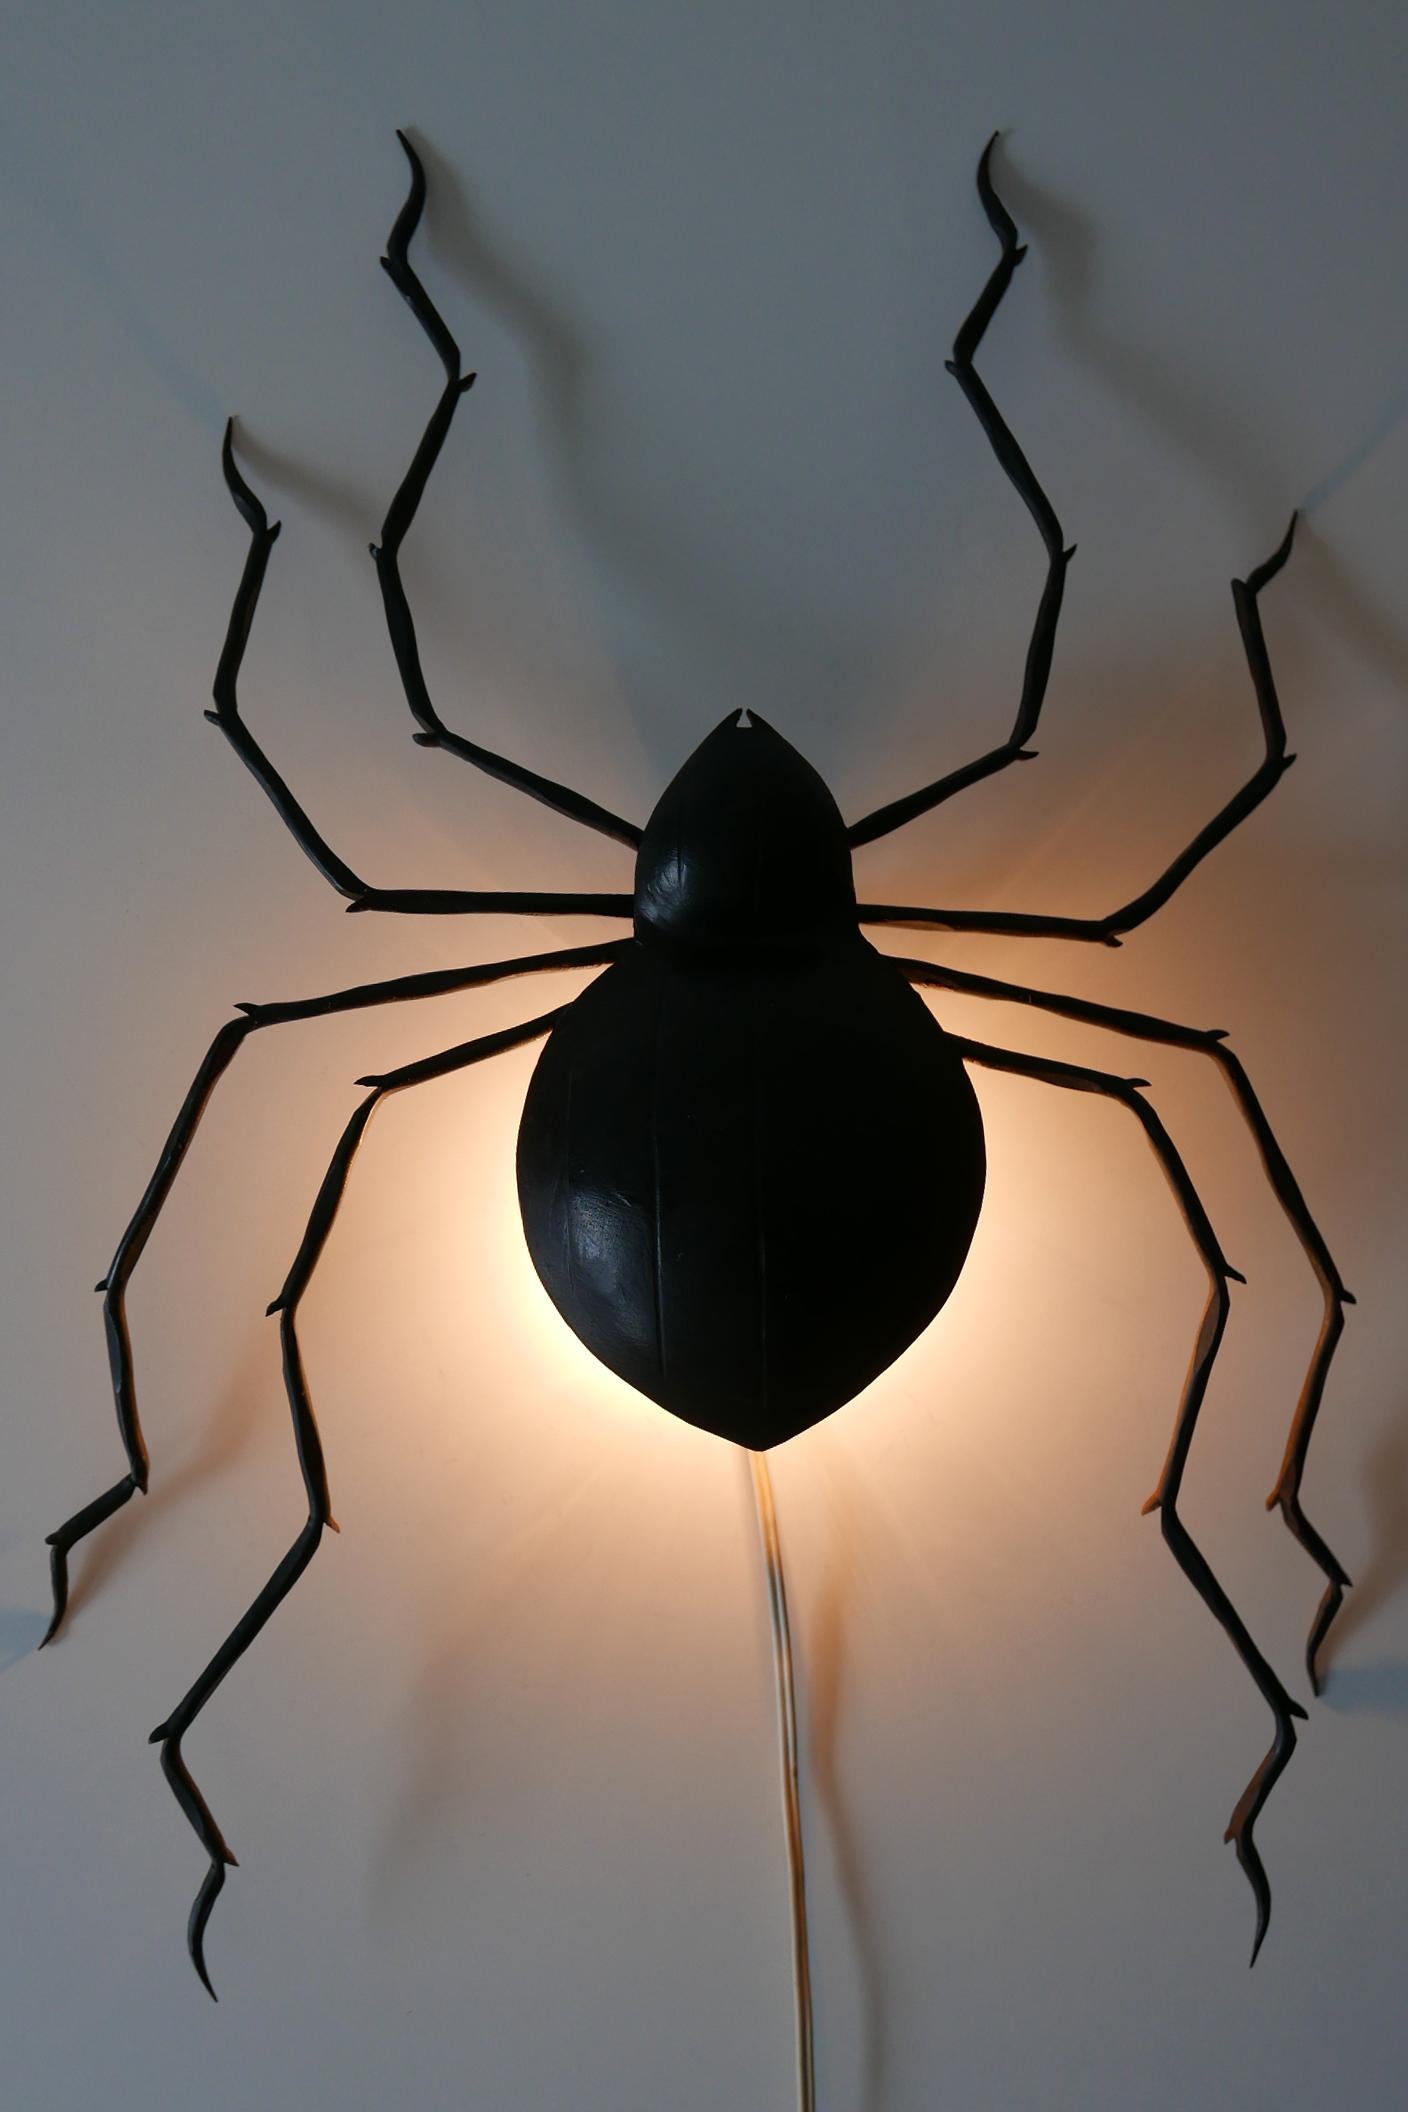 Extremely rare and beautiful Mid-Century Modern wall lamp or sconce in shape of a giant spider. Manufactured probably in 1970s, Germany. With lovely details.

The lamp is executed in black lacquered iron, the lamp needs 1 x E14/E12 Edison screw fit